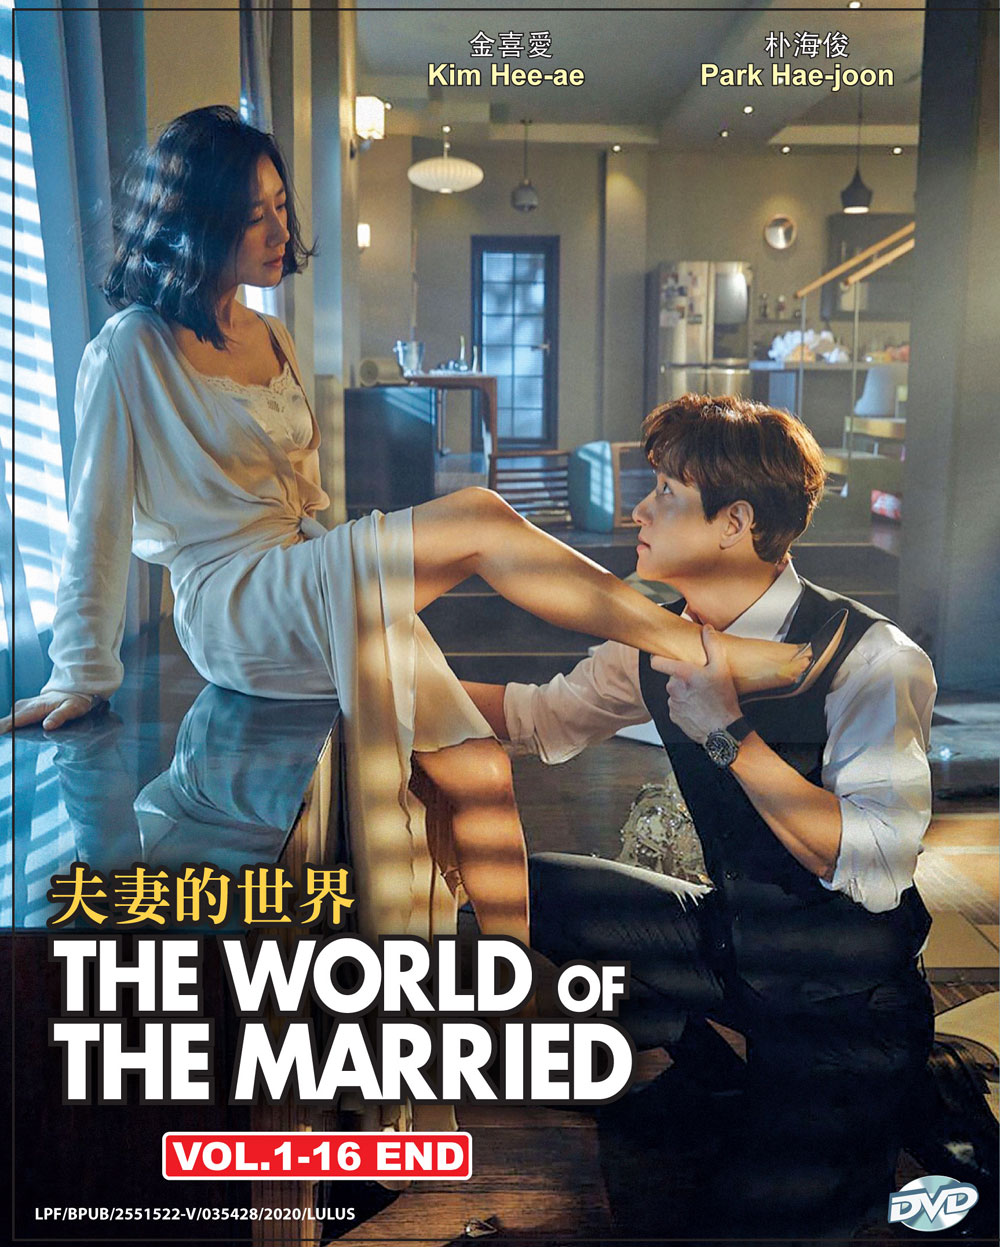 The World Of The Married Dvd 2020 Korean Tv Series Ep 1 16 End English Sub 4350